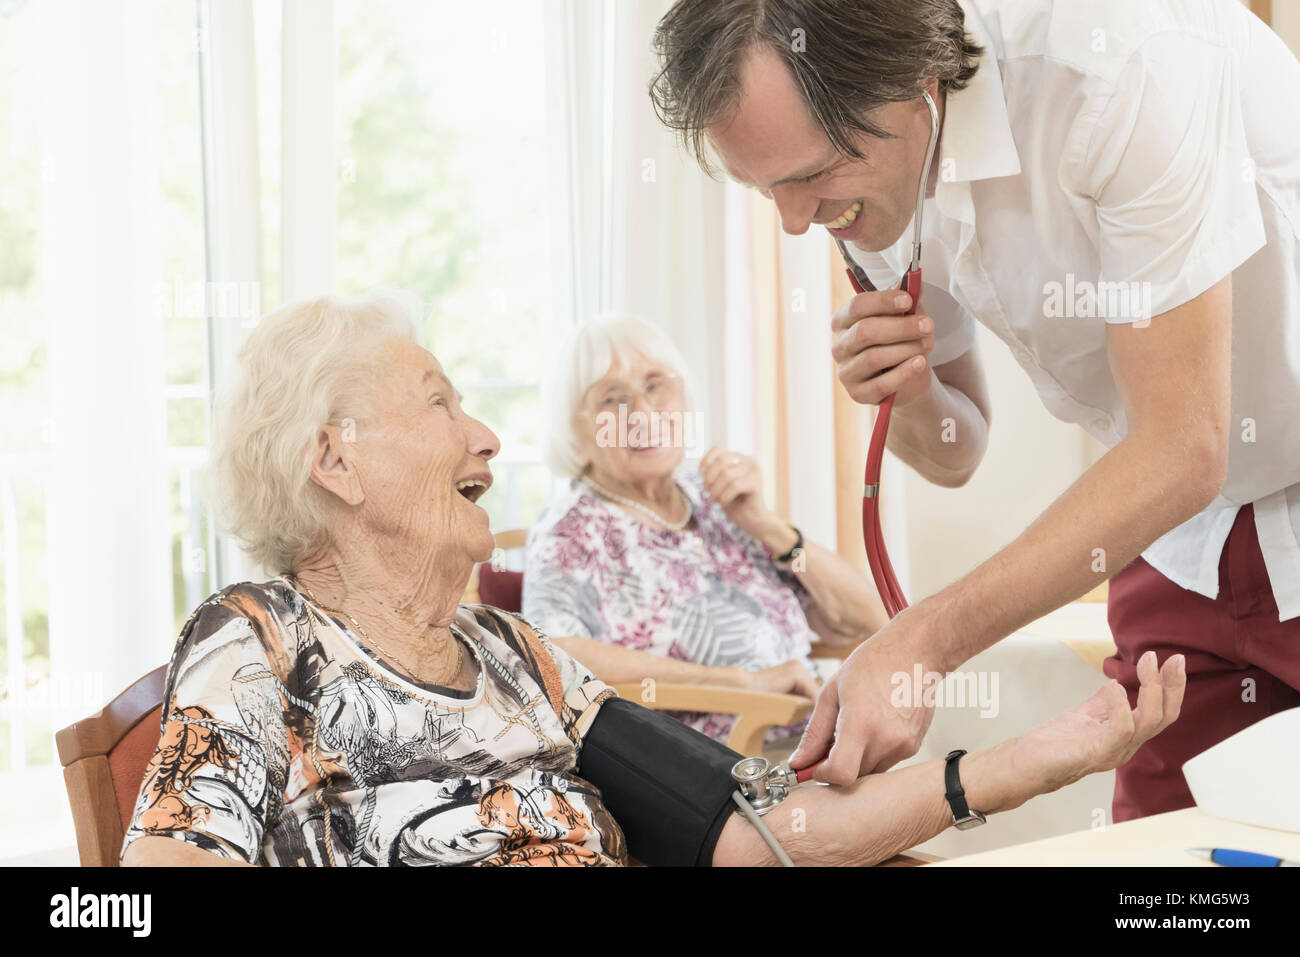 Caretaker checking blood pressure of senior woman in rest home Stock Photo